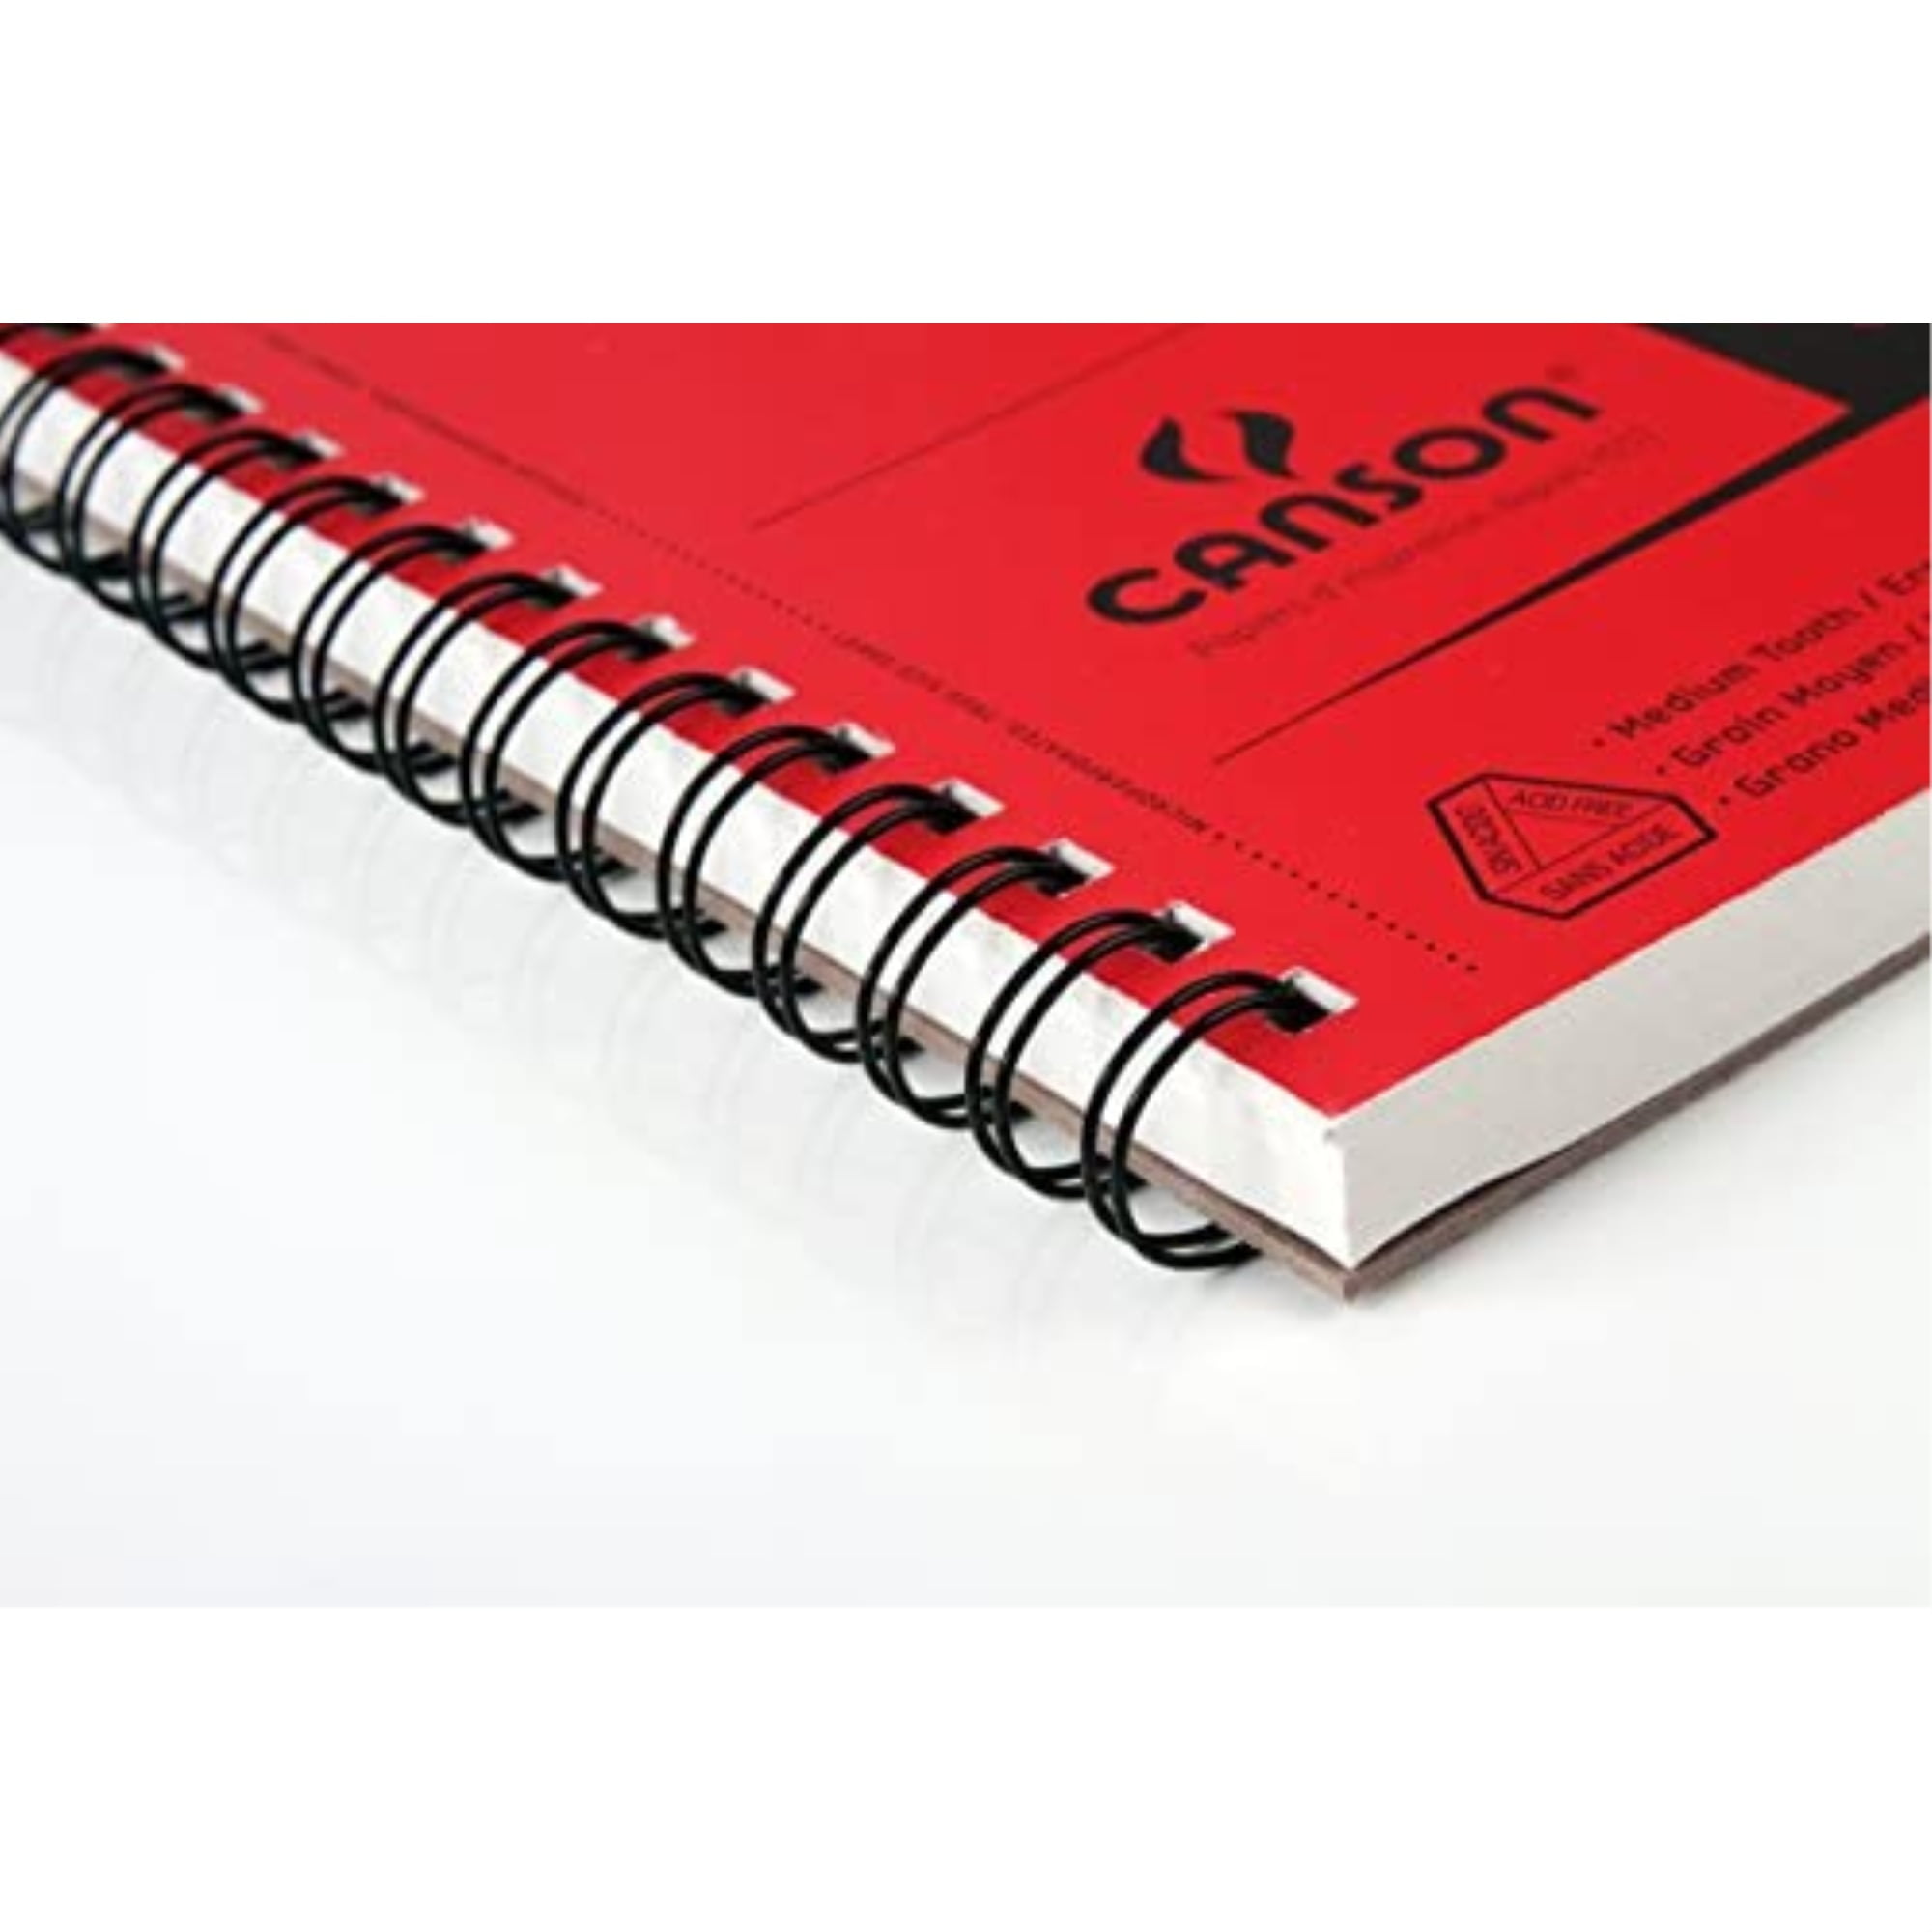  Canson XL Series Paper Sketch Pad for Charcoal, Pencil and  Pastel, Side Wire Bound, 50 Pound, 18 x 24 Inch, 50 Sheets : Arts, Crafts &  Sewing